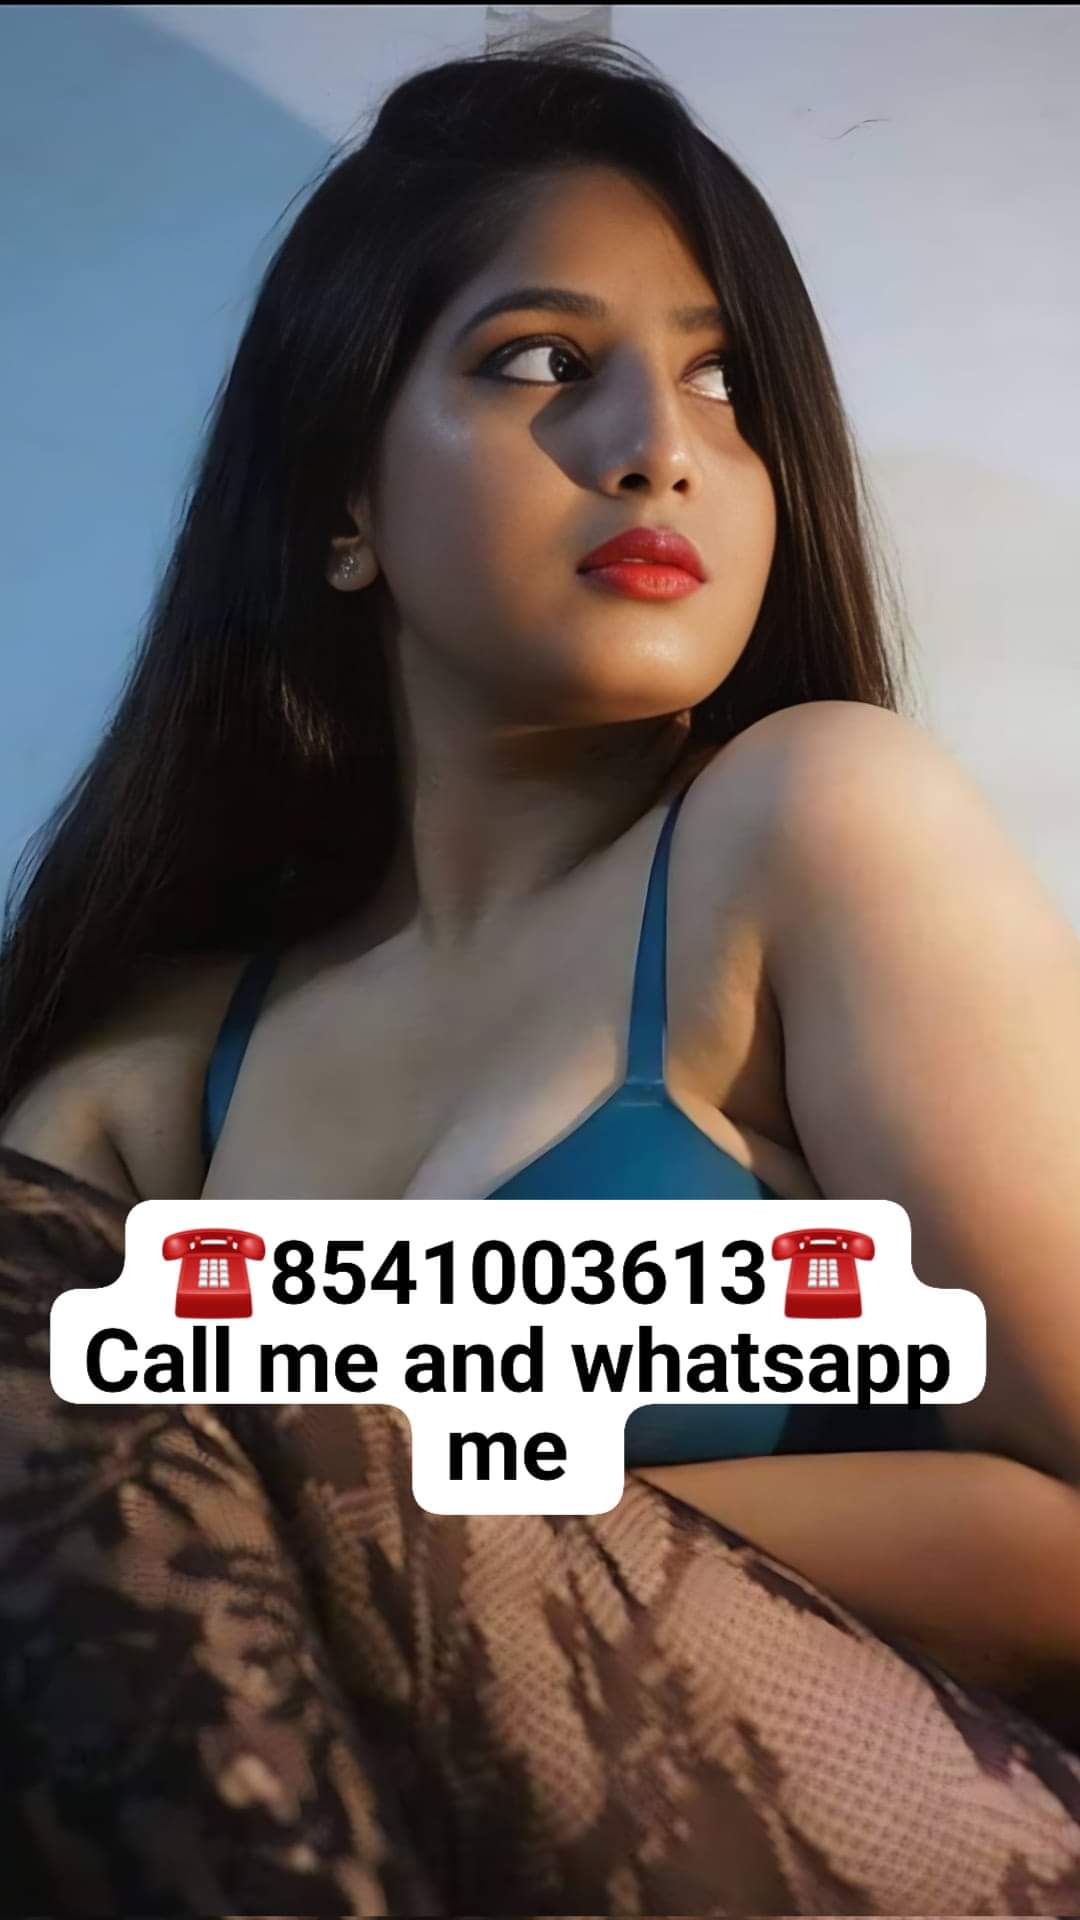 Jalgaon call girls available hot and sexy college girls